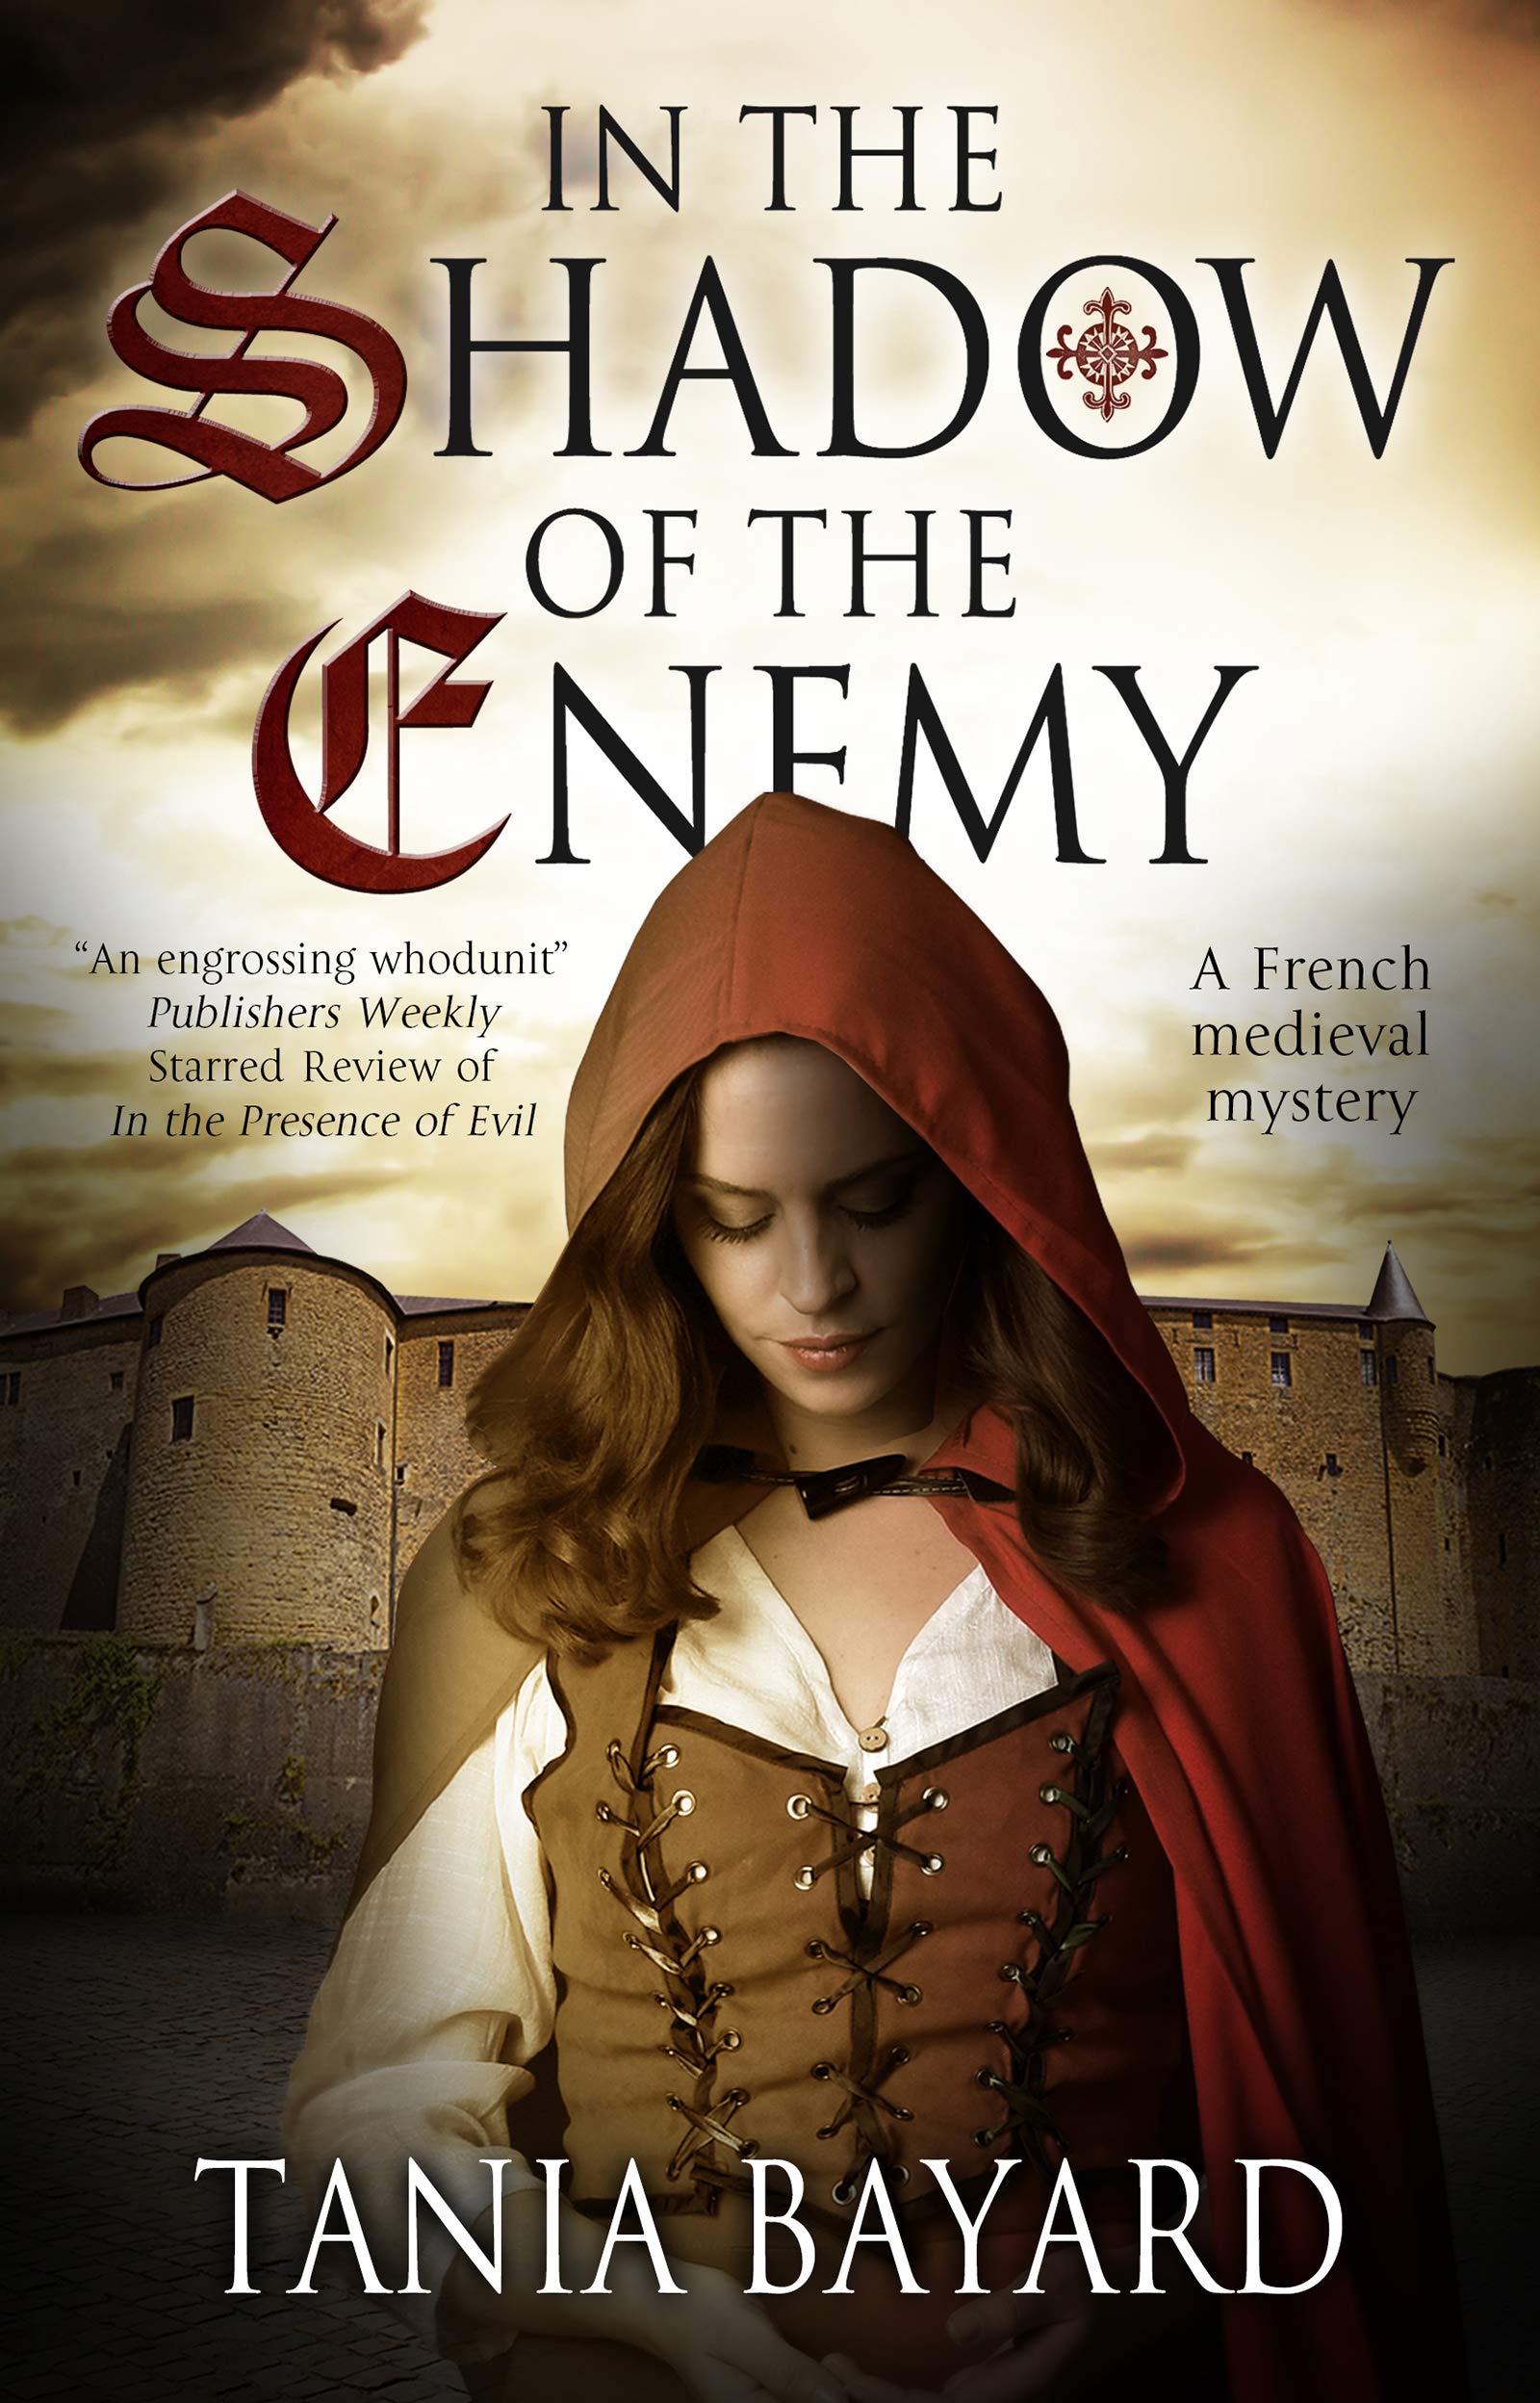 Historical Fiction Can Be Murder with Tania Bayard's <i> In the Shadow of the Enemy </i>